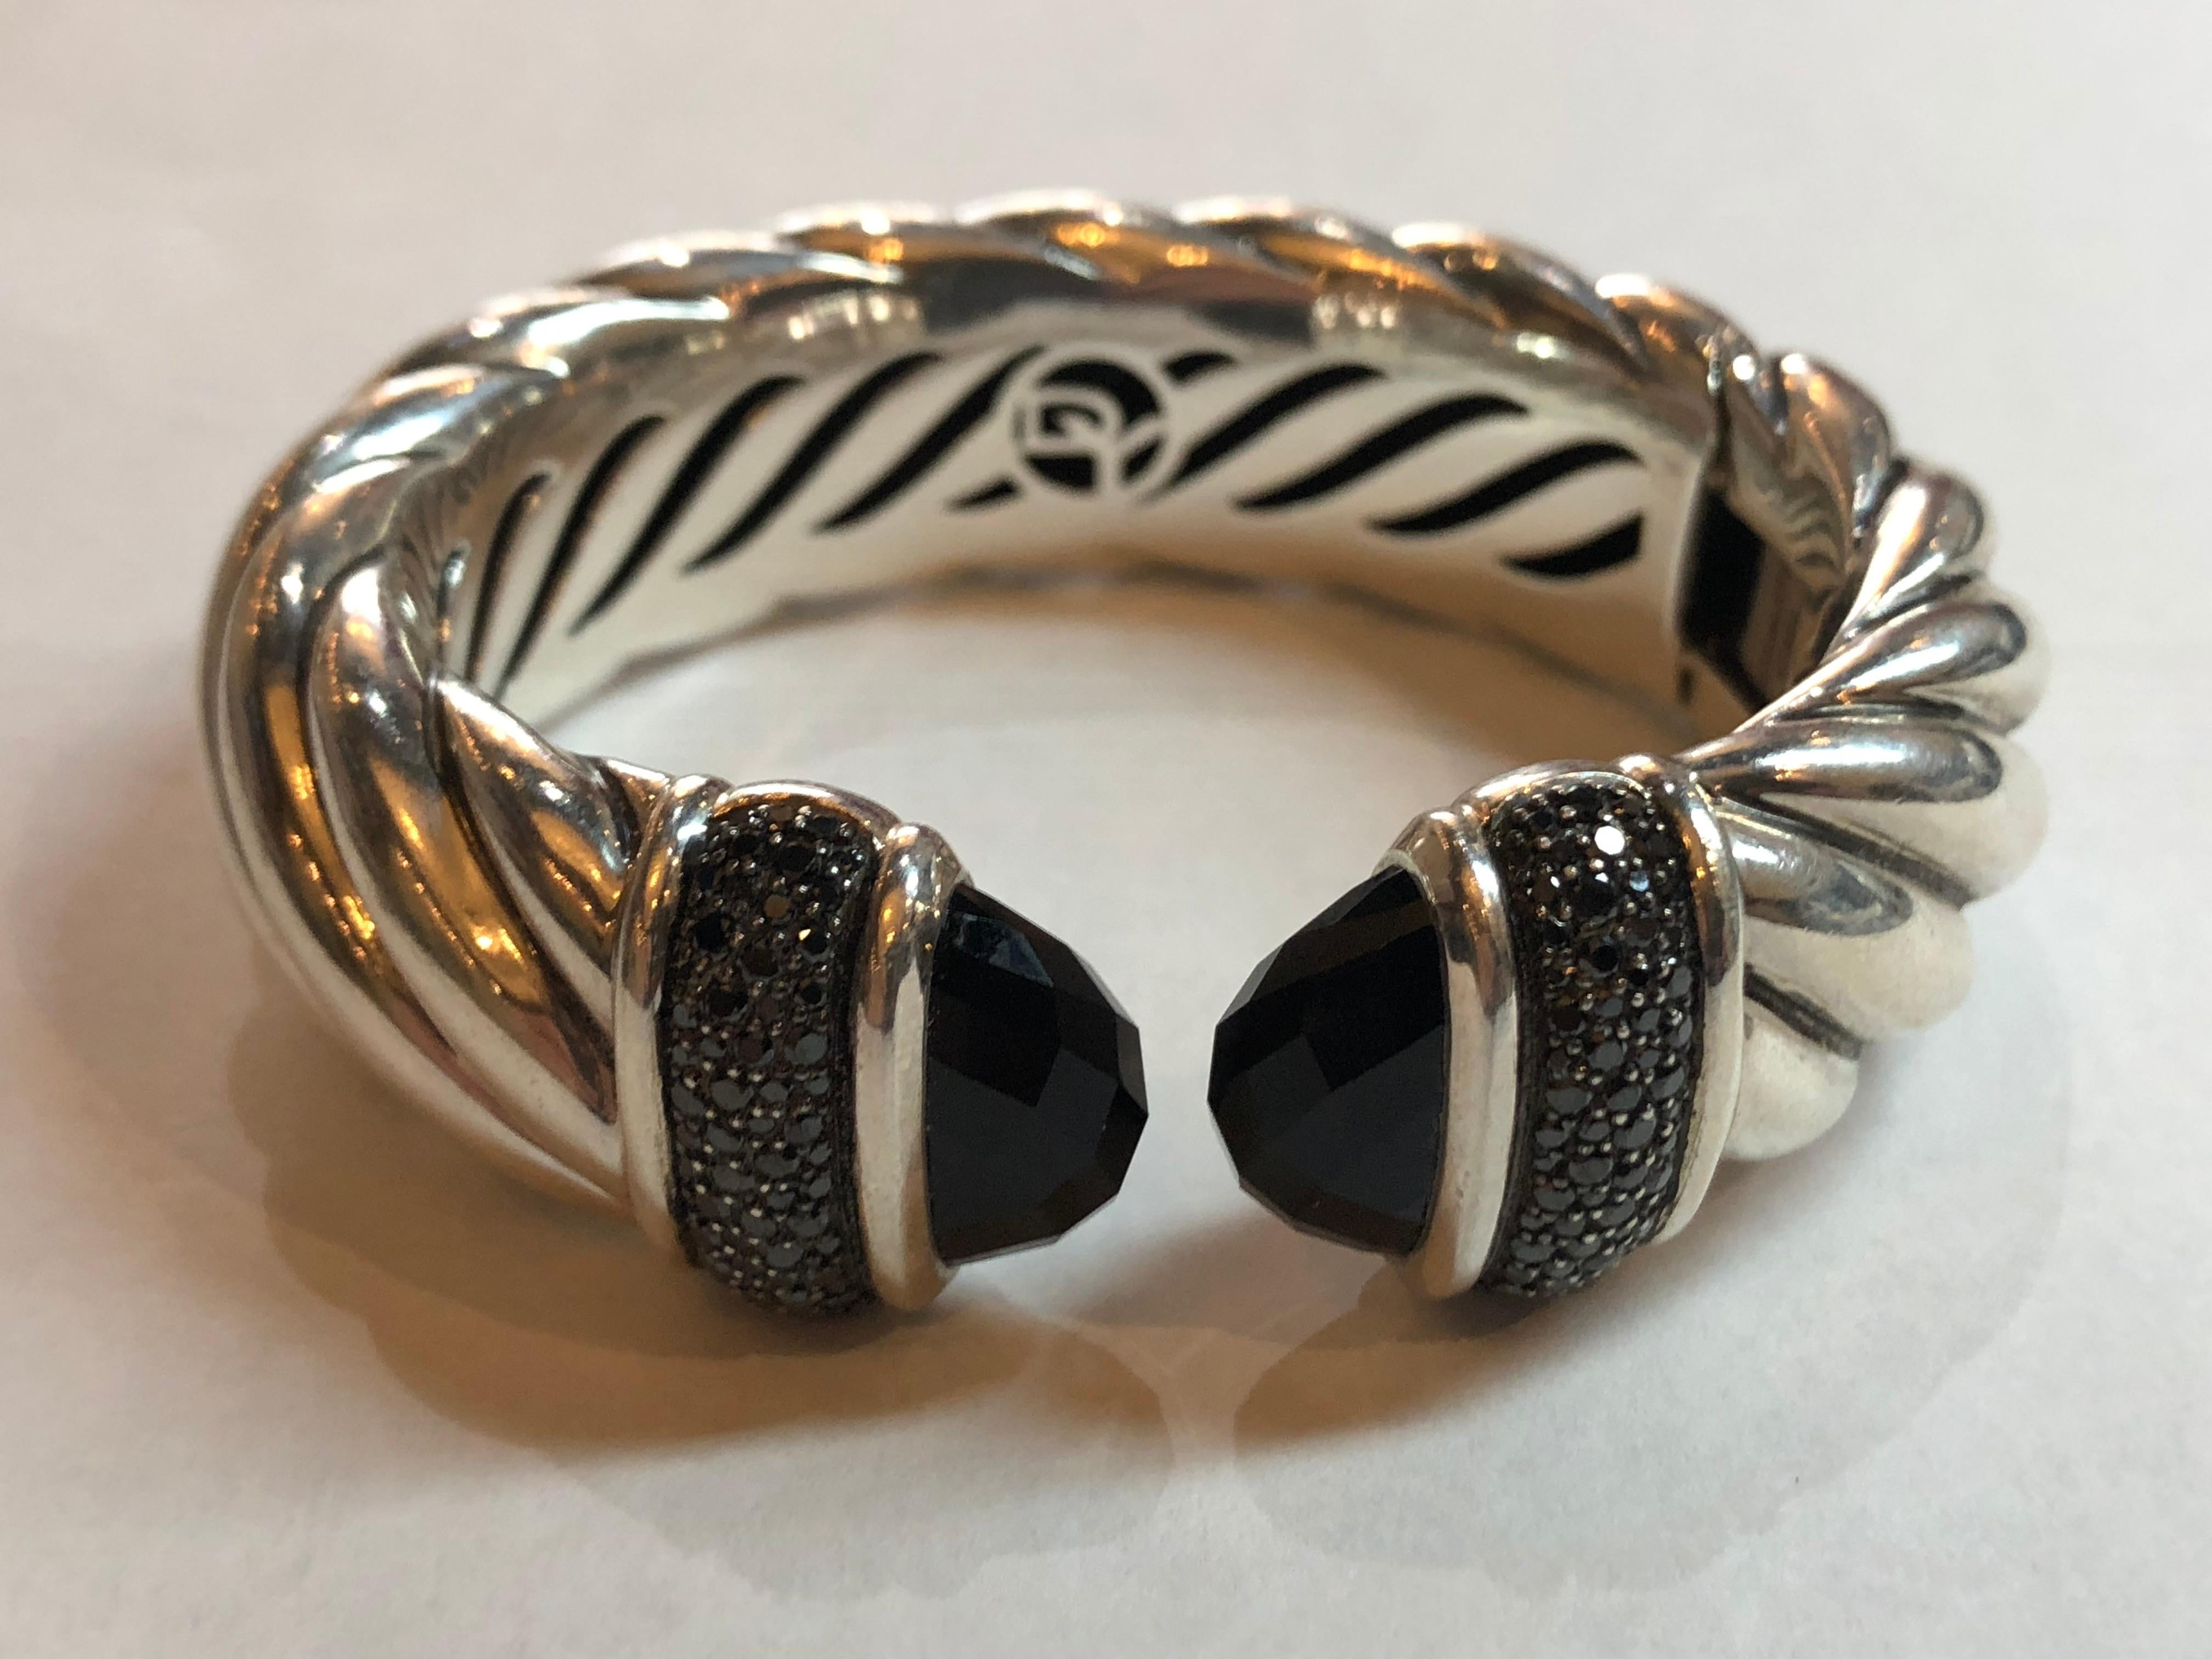 David Yurman Waverly Cuff 1.19 cts Black Diamonds and Black Onyx
Retail $3500.00
Weighs 65.4 Grams
Signed D.Y. 925
Excellent Condition